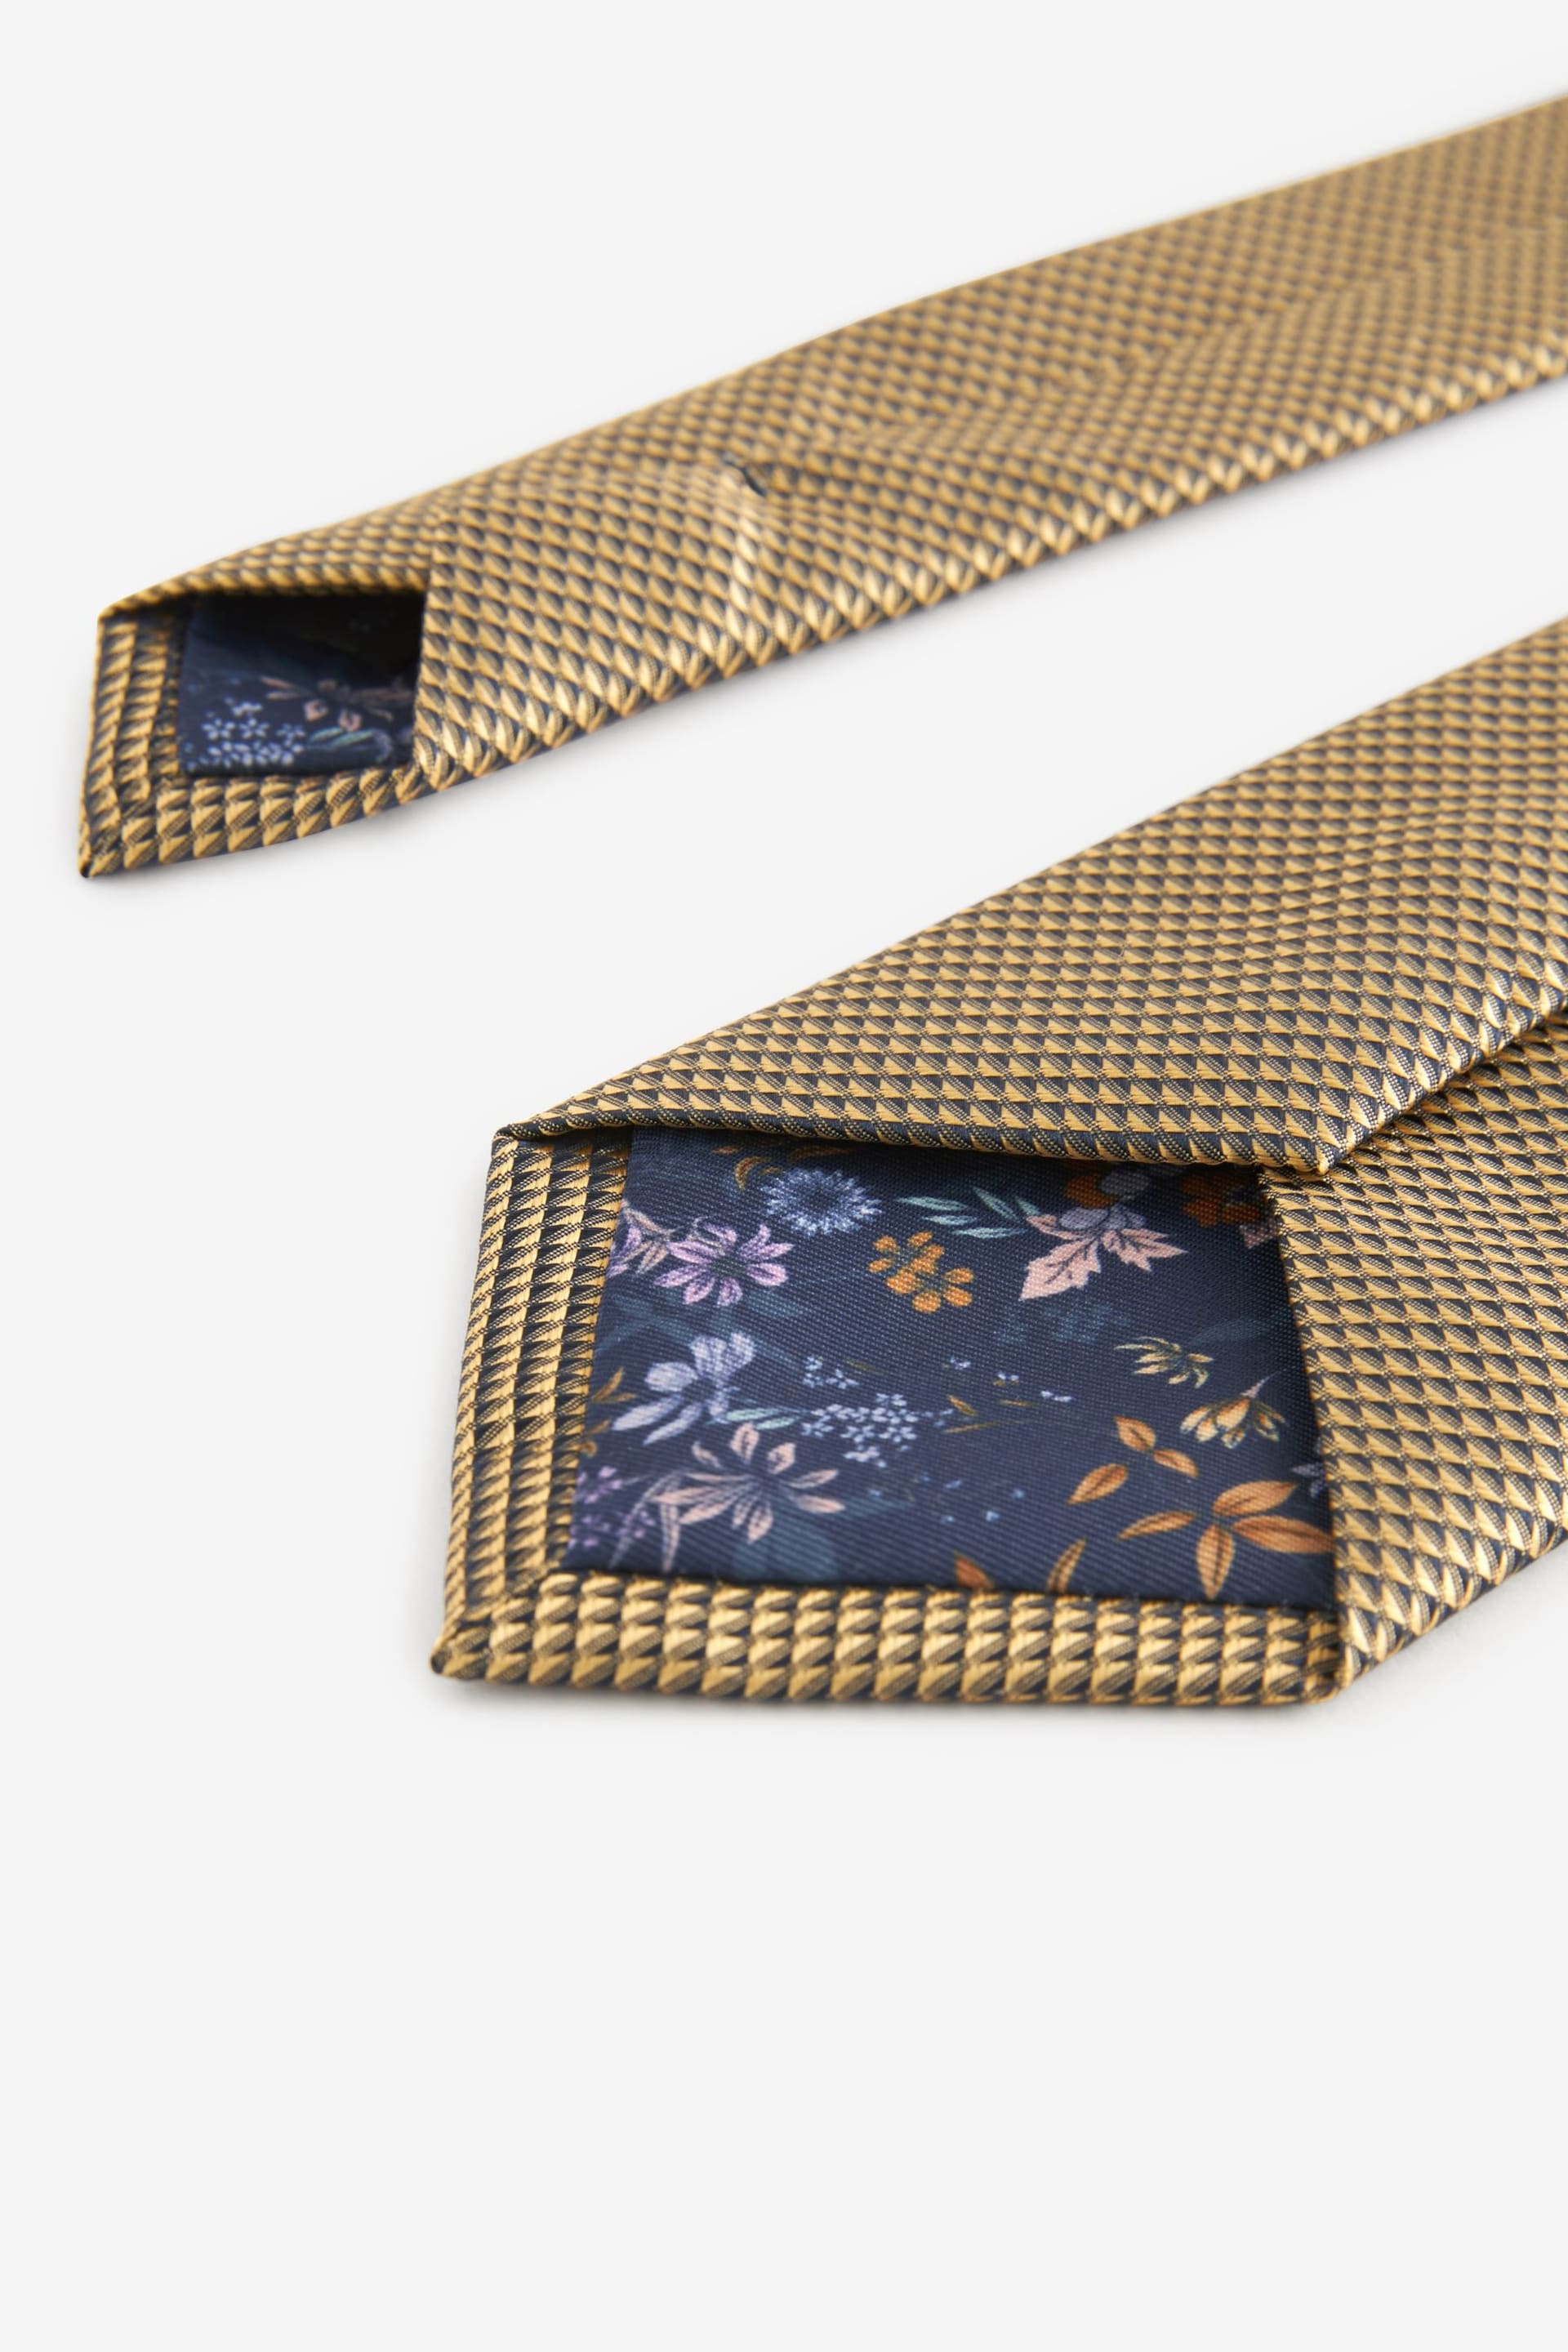 Yellow Gold Textured Tie - Image 3 of 3